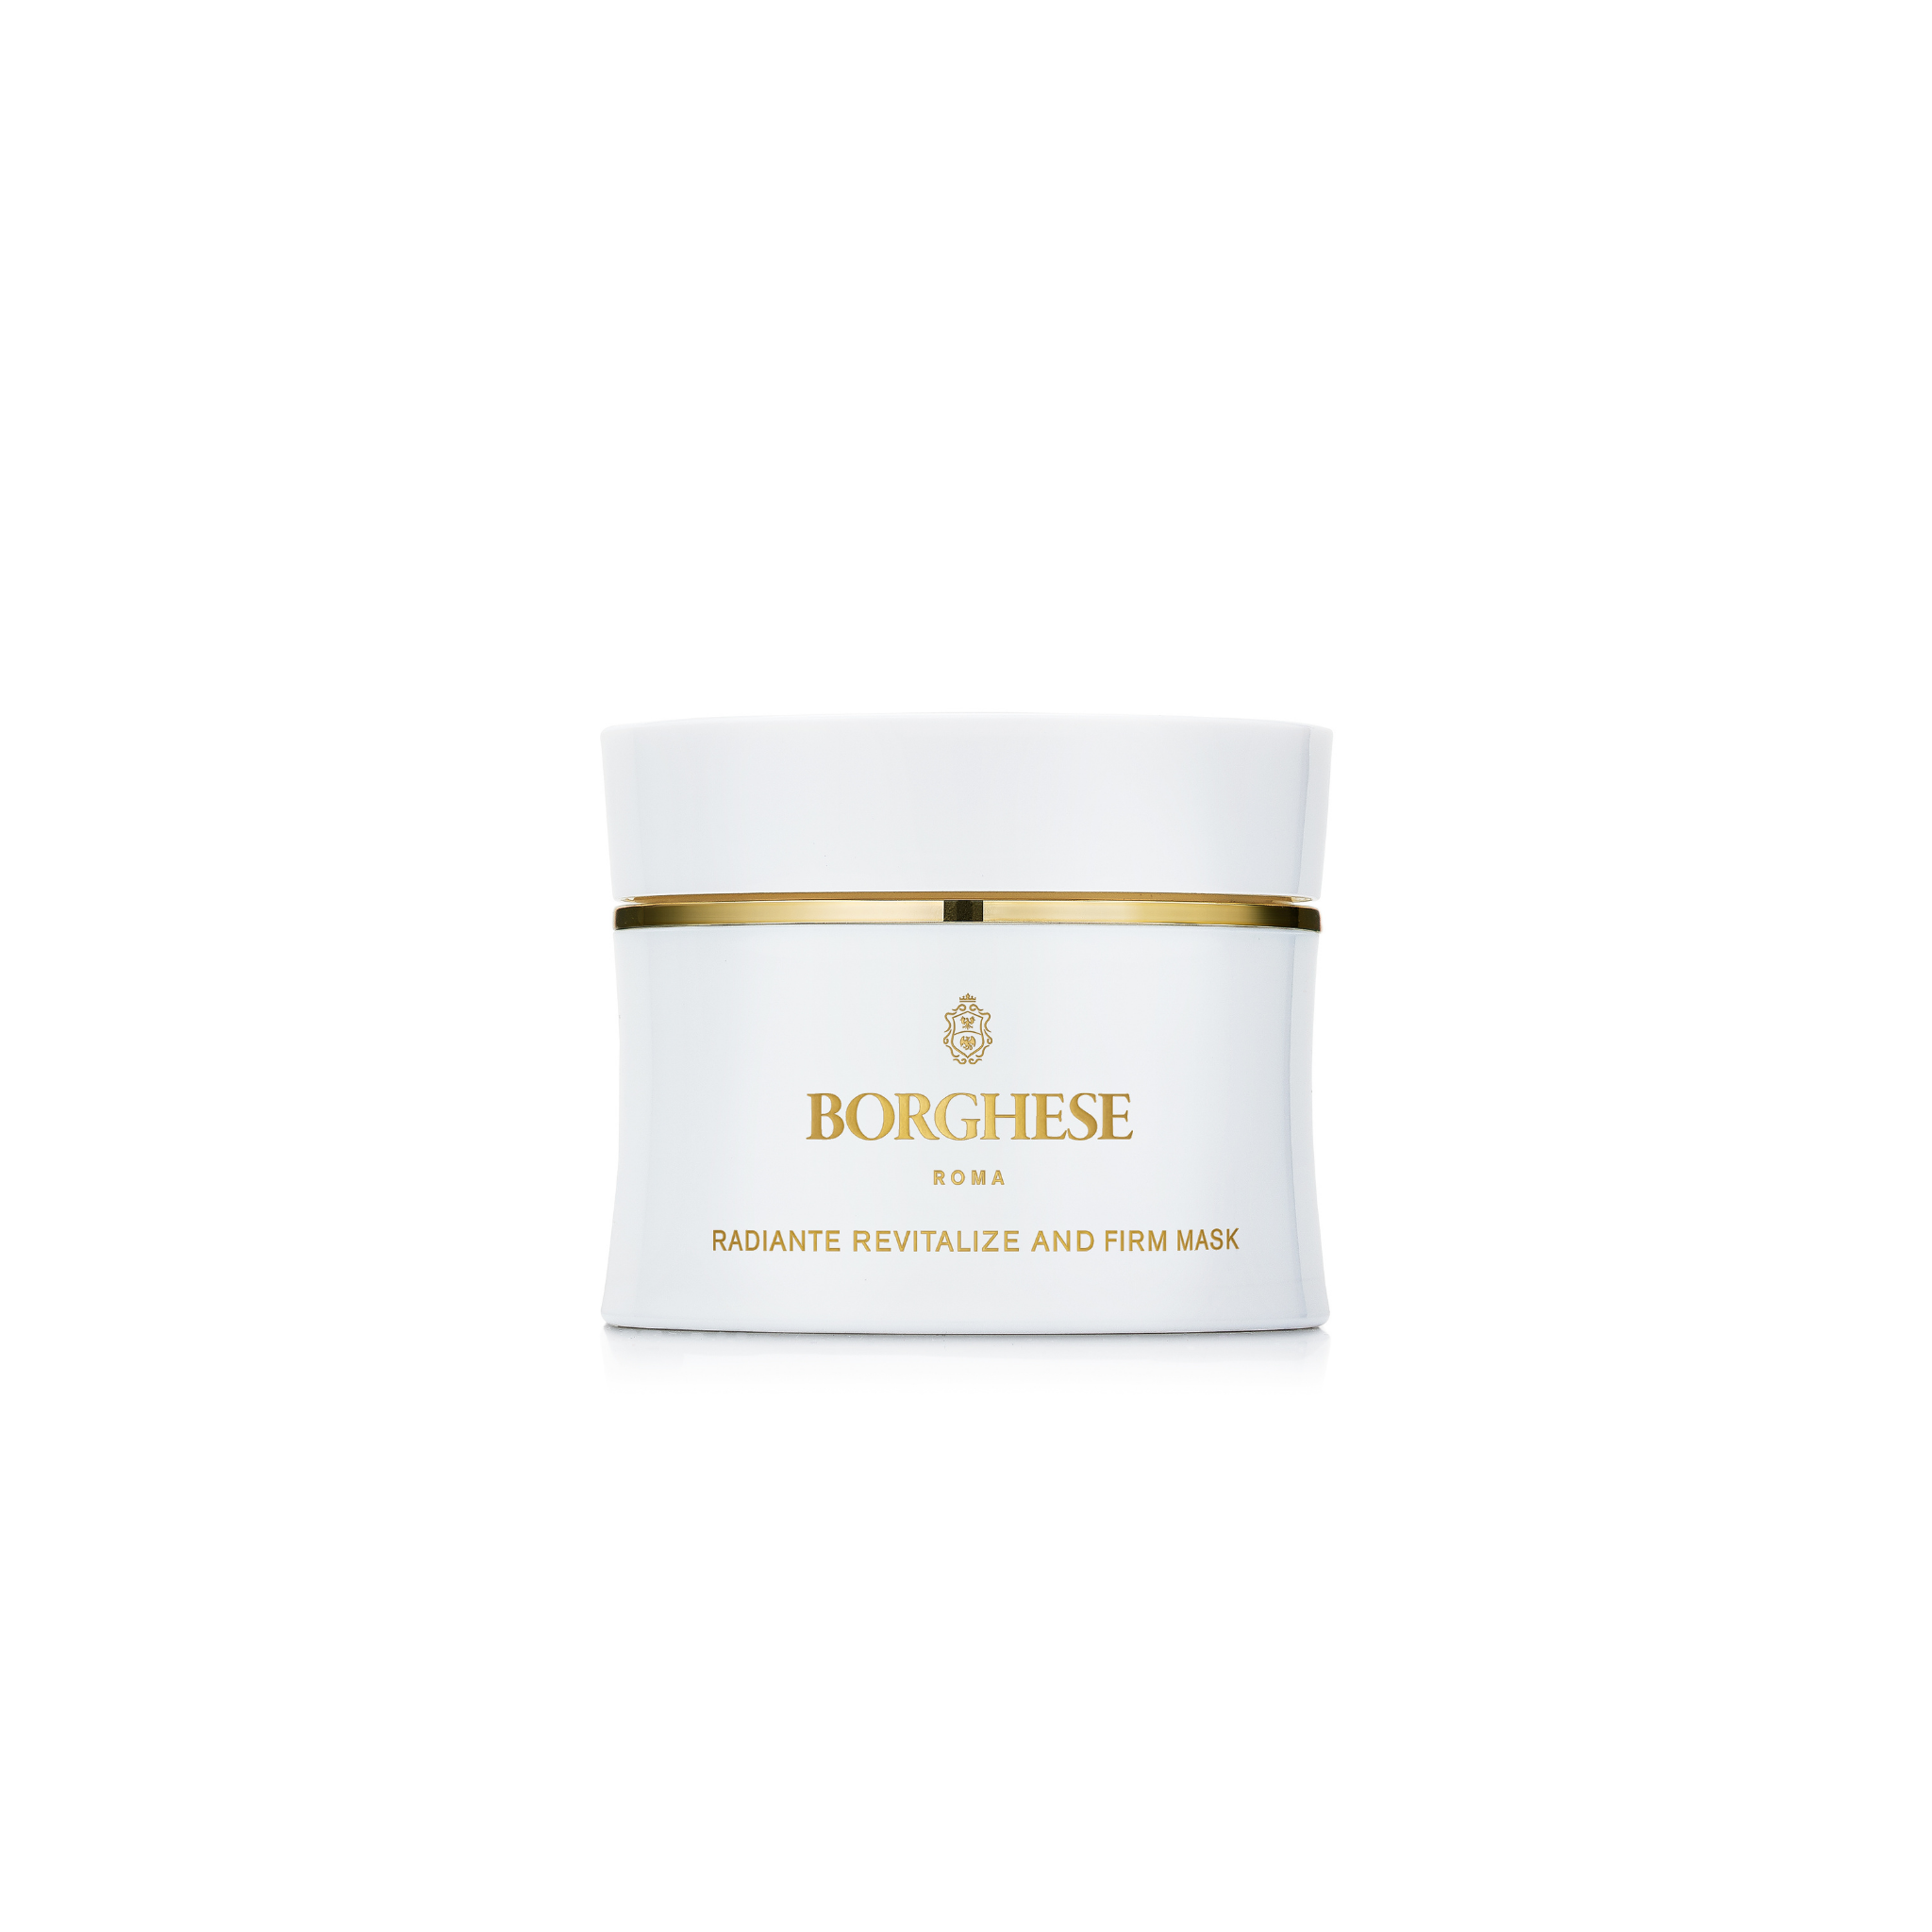 Radiante Revitalize and Firm Mask